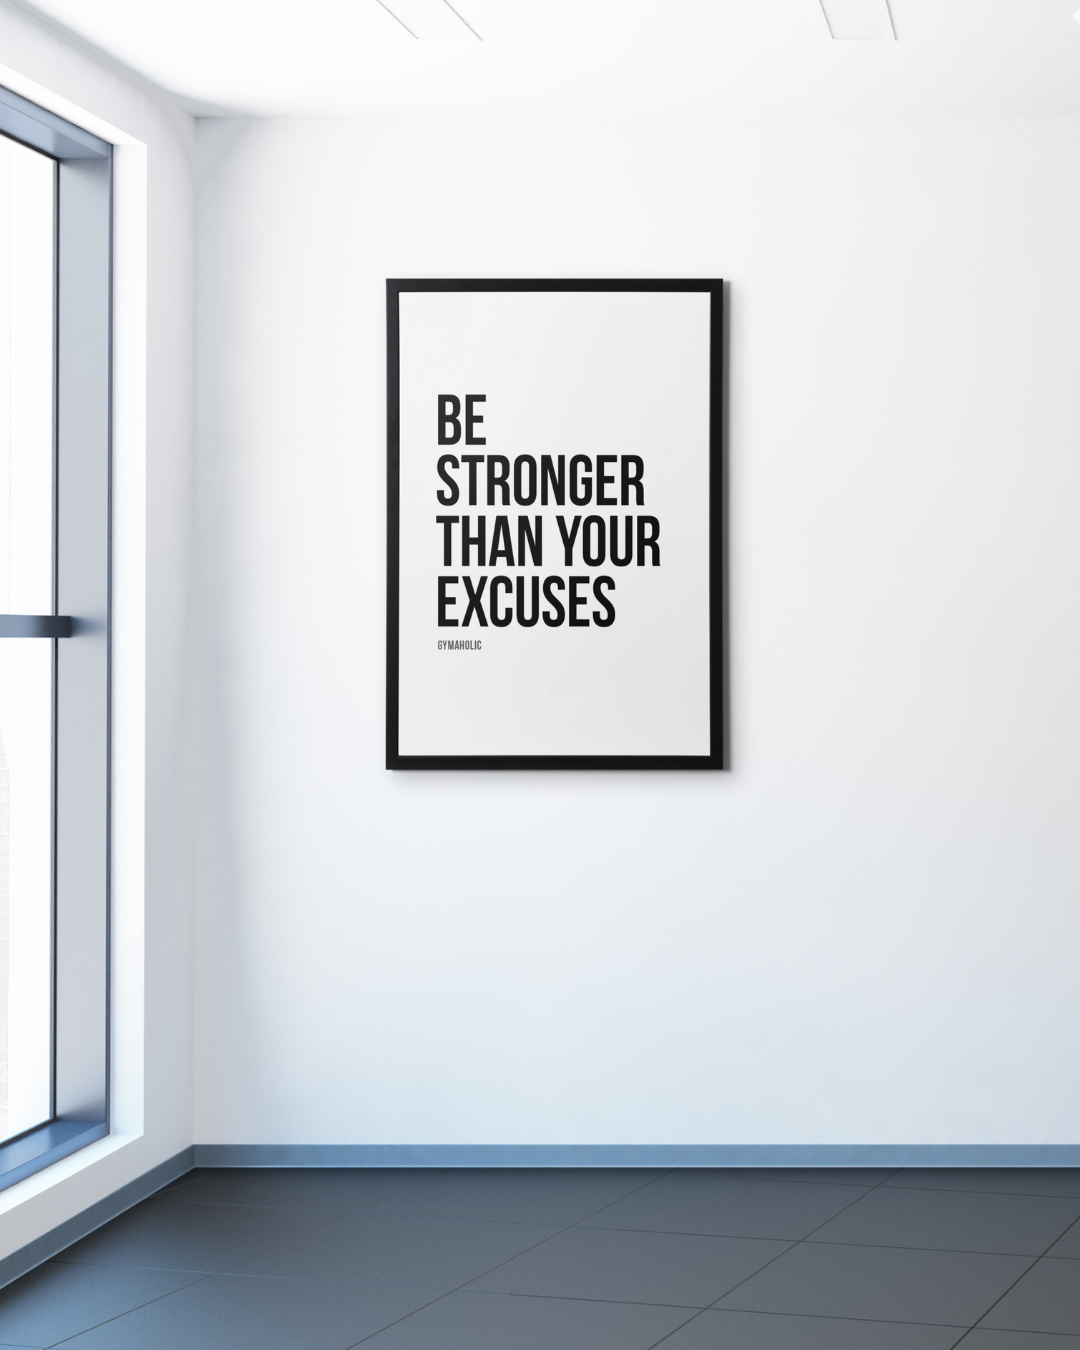 Be stronger than your excuses.